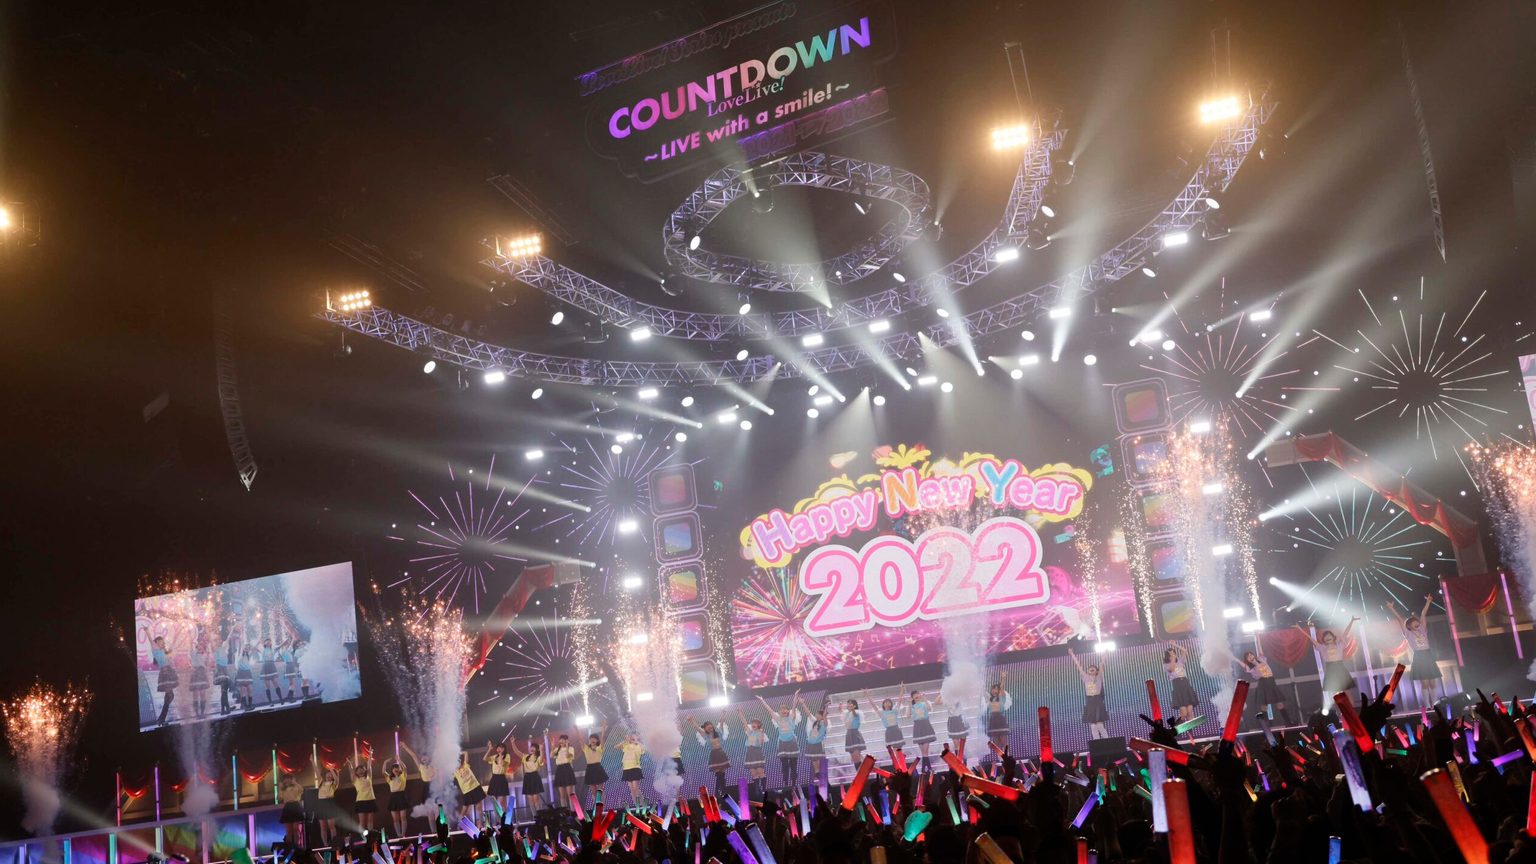 「LoveLive! Series Presents COUNTDOWN LoveLive! 2021→2022 〜LIVE with a smile!〜」独占初放送！